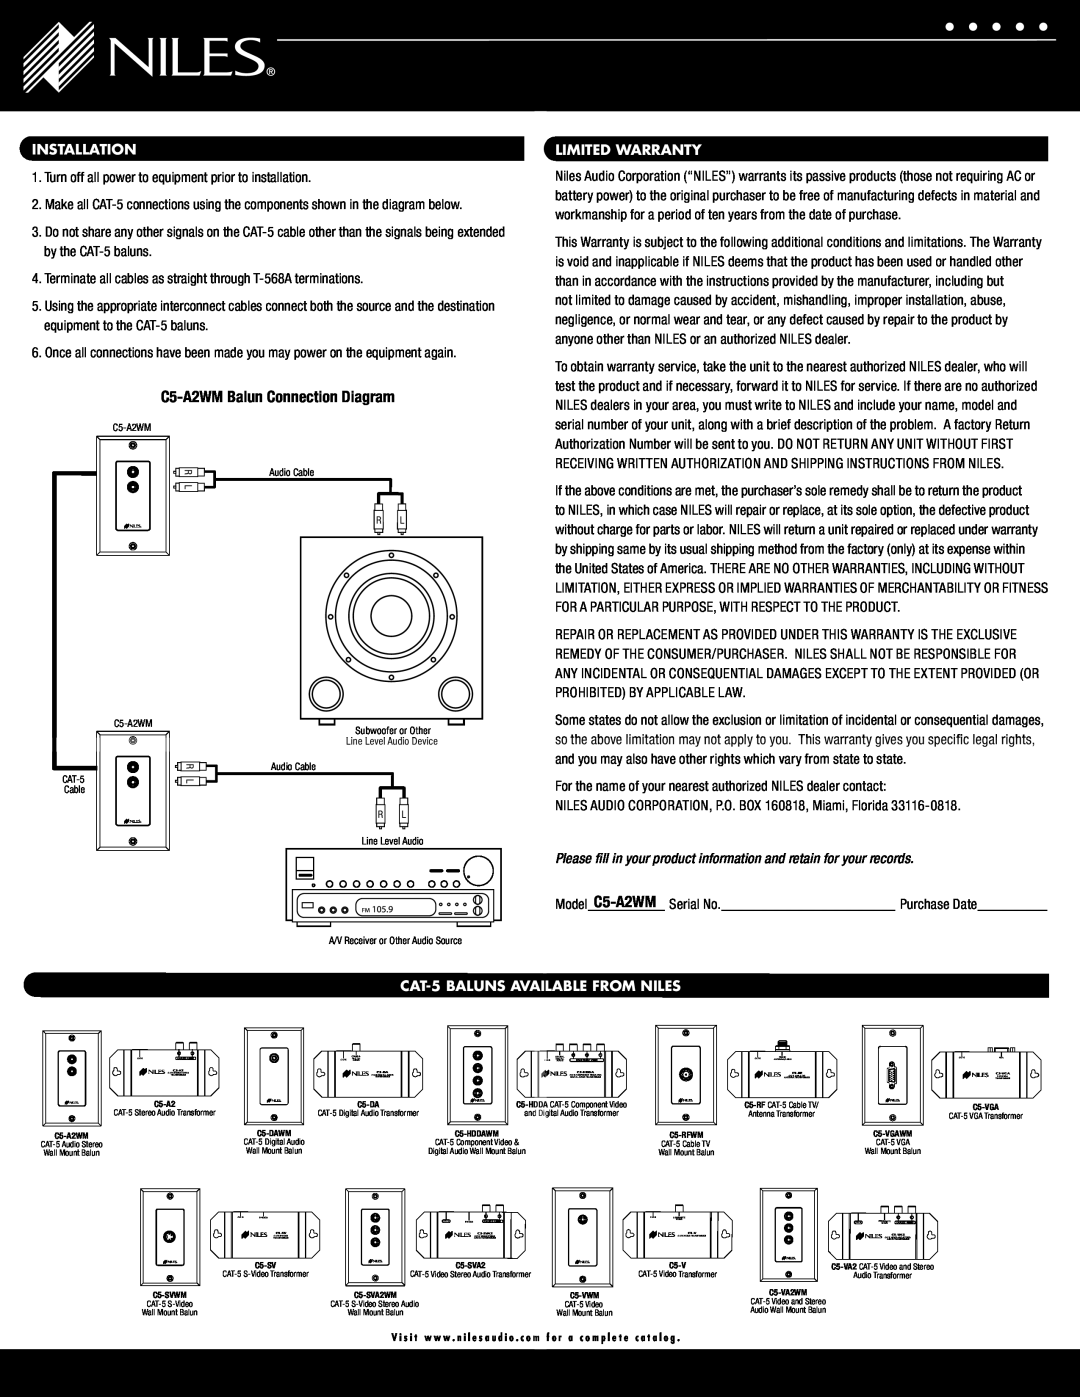 Niles Audio warranty Installation, Limited Warranty, CAT-5BALUNS AVAILABLE FROM NILES, C5-A2WMBalun Connection Diagram 